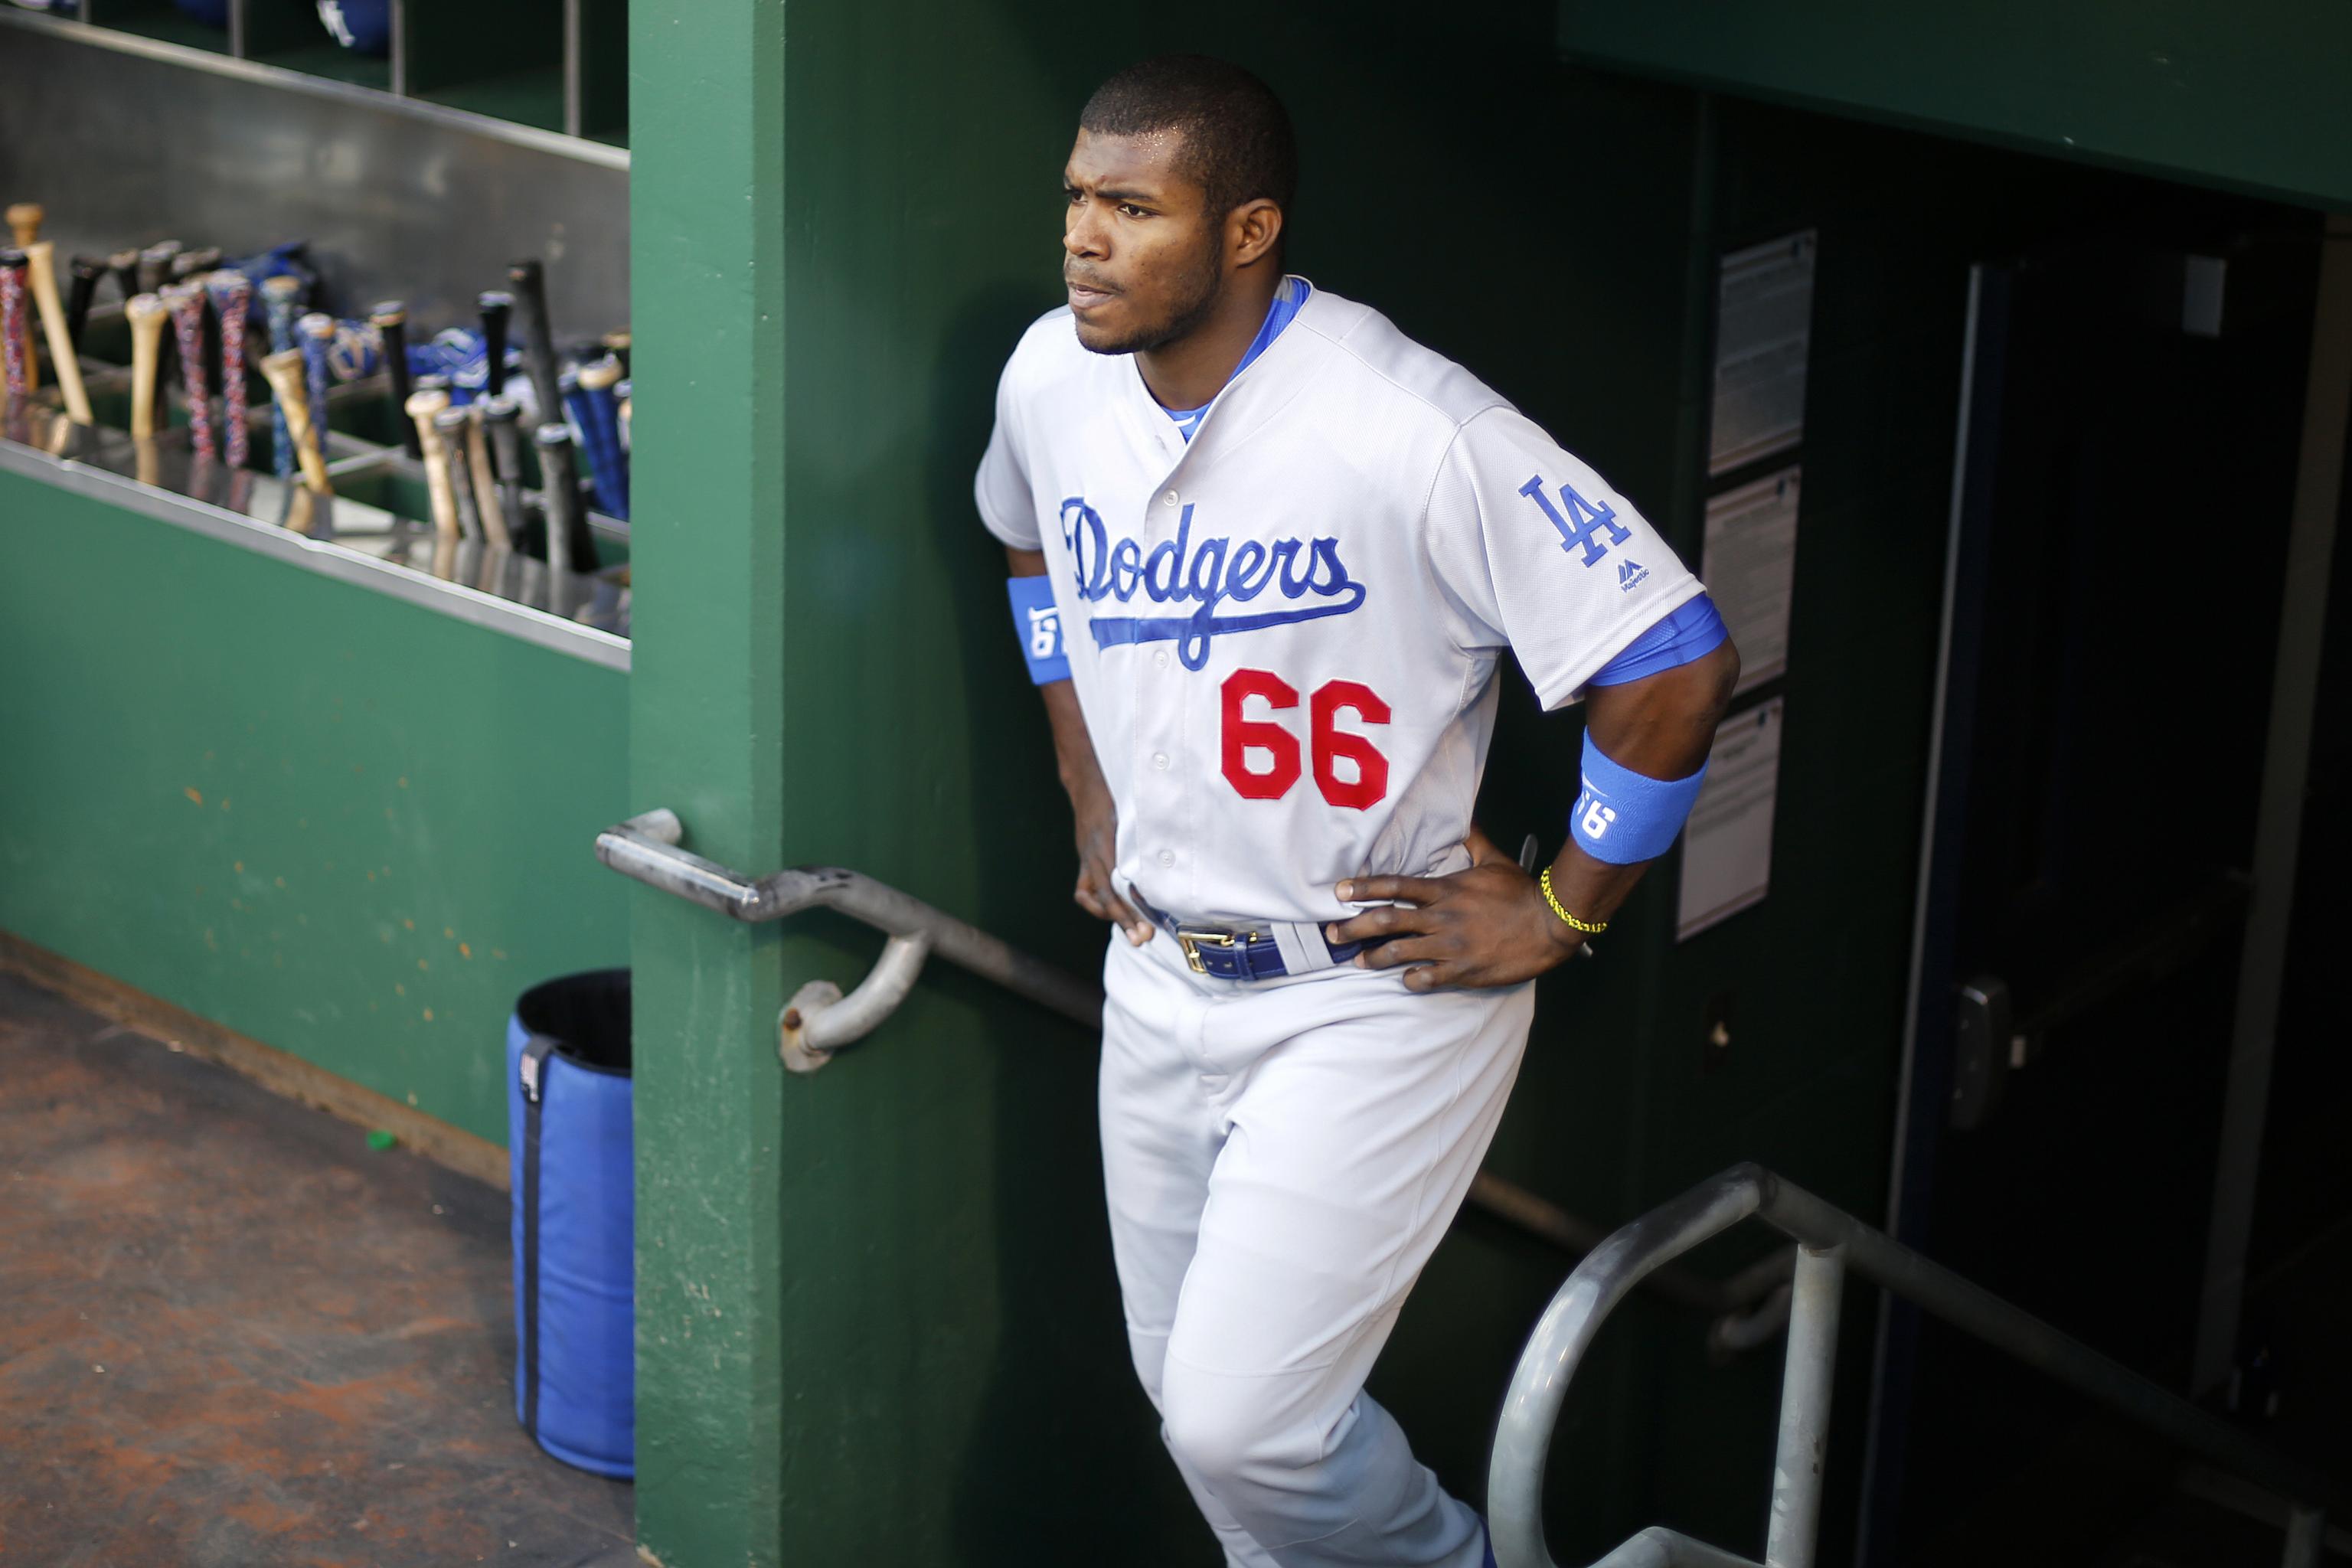 Yasiel Puig, trading Matt Kemp and not feeling sorry for the Dodgers